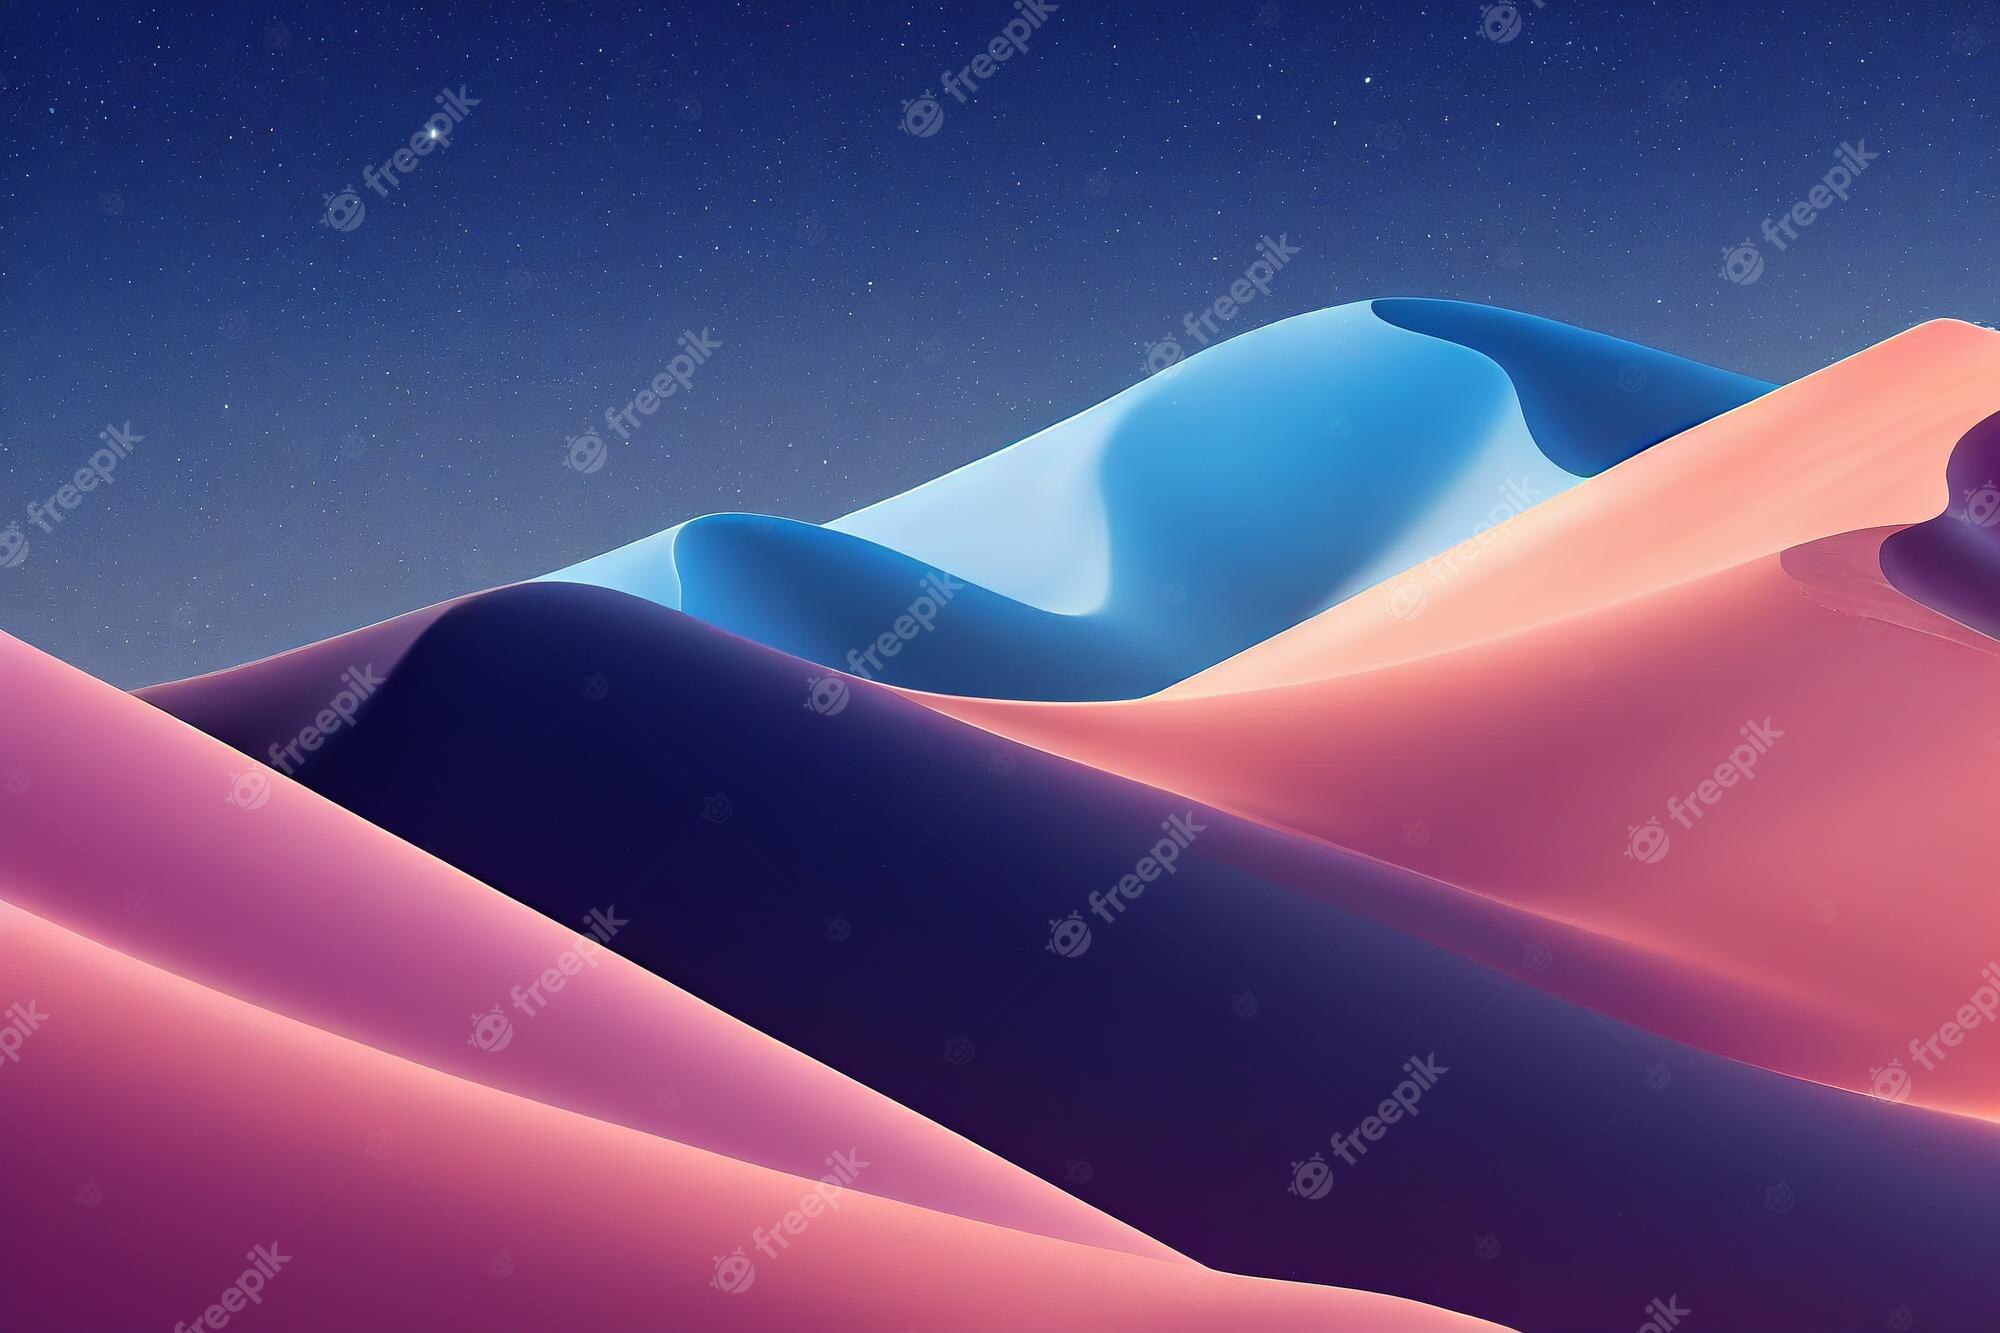 The colorful desert landscape with a starry sky - 3D